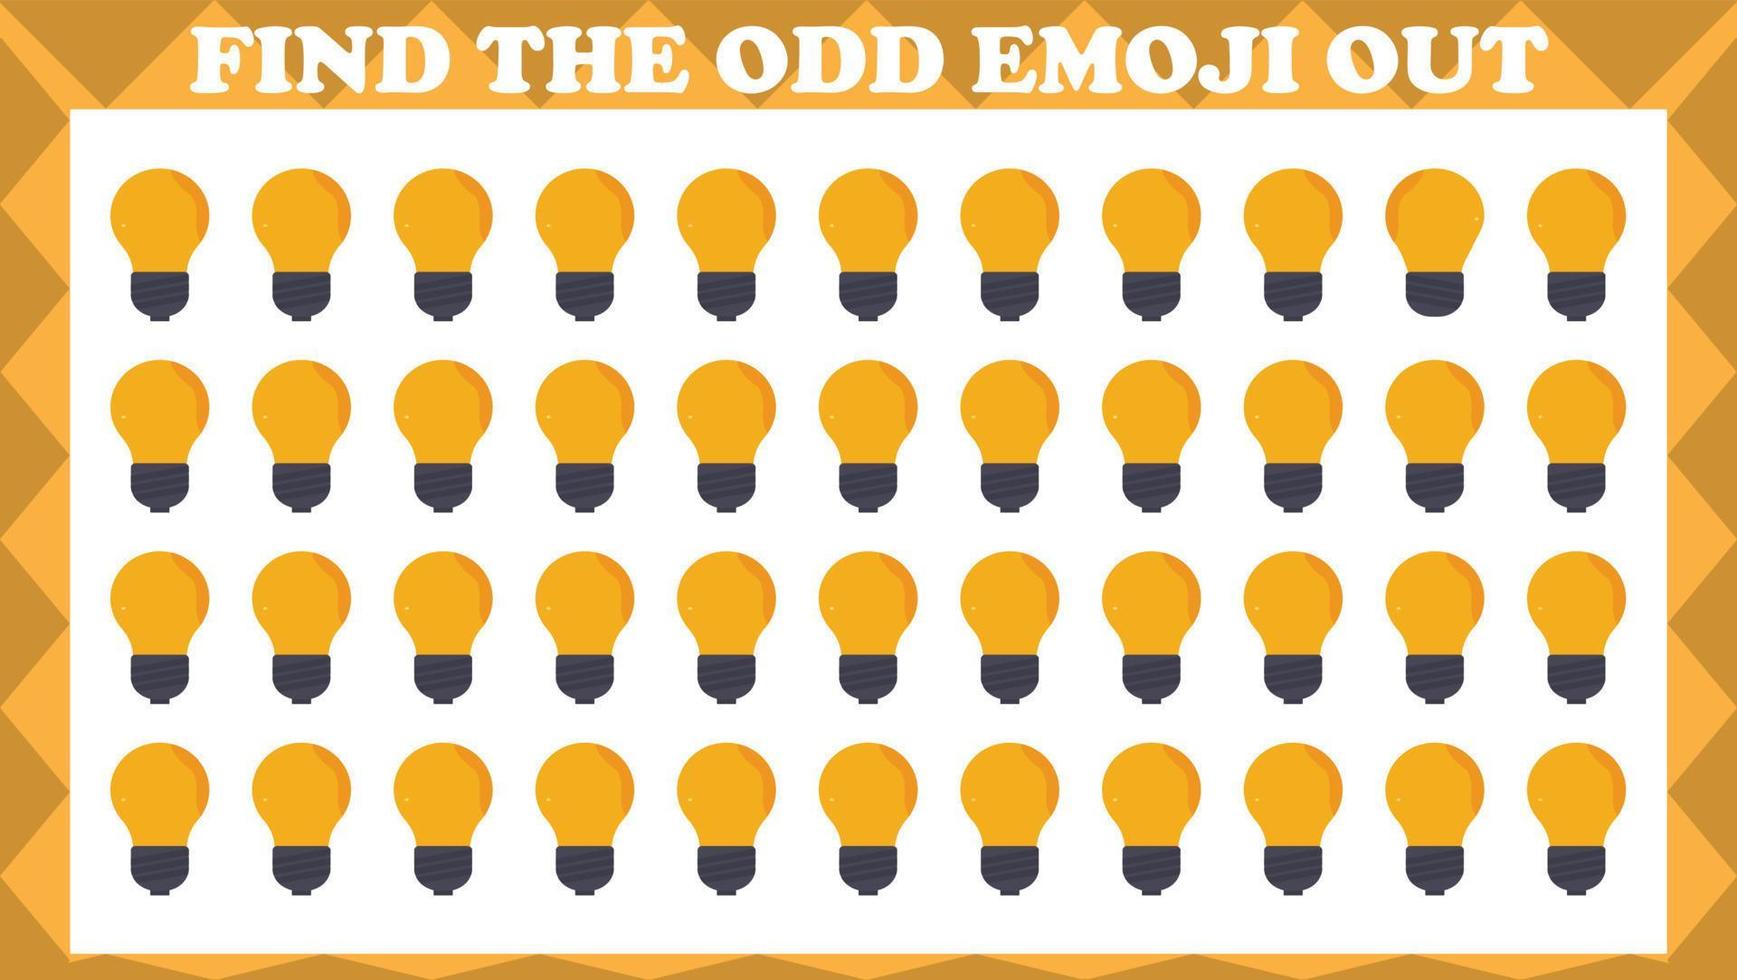 Find The Odd Emoji Out 18, Visual Logic Puzzle Game. Activity Game For Children. Vector Illustration.